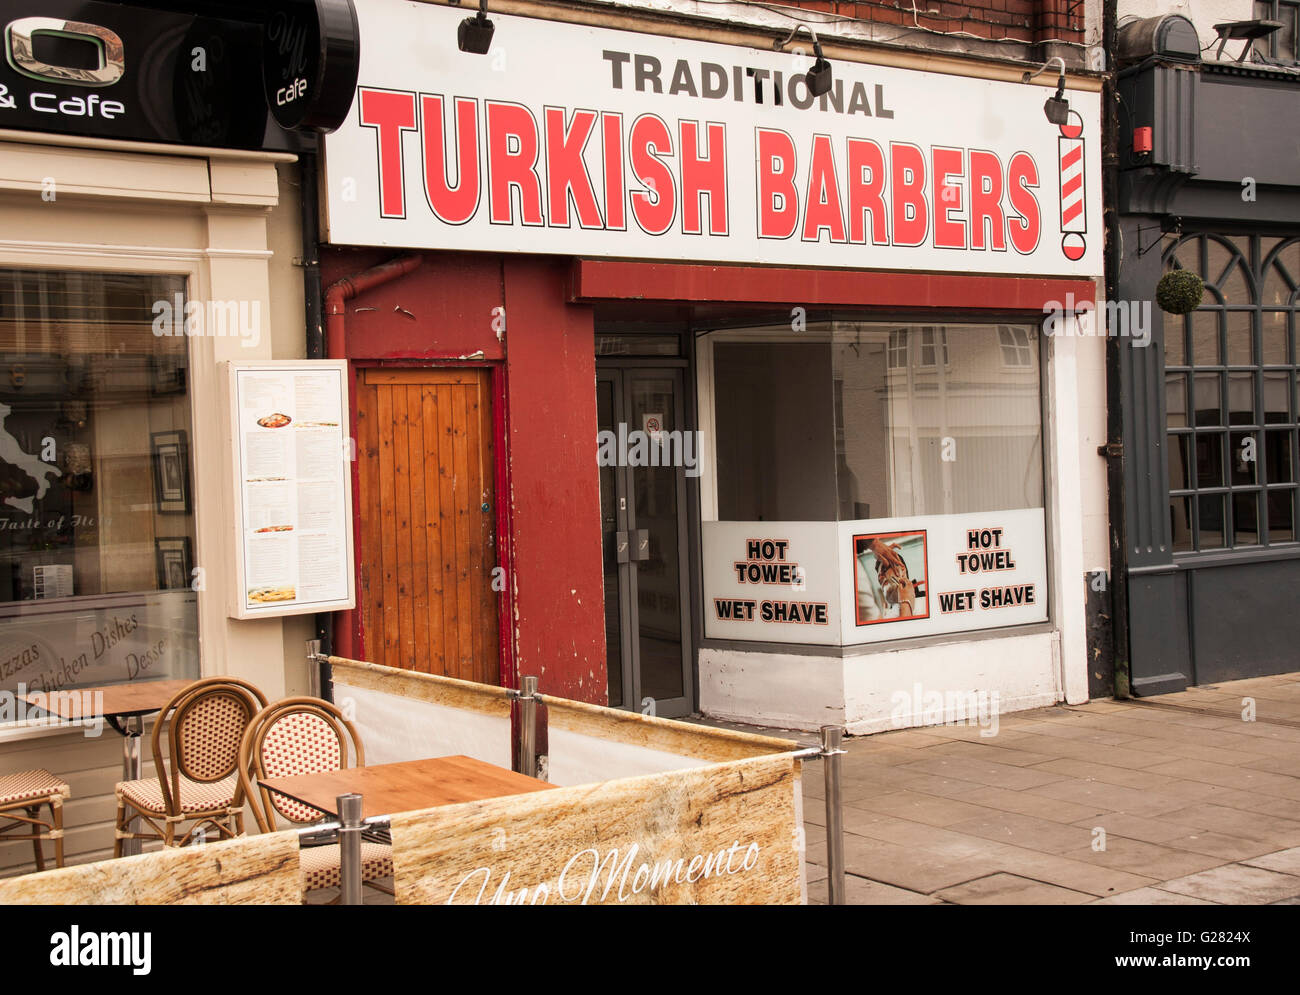 A traditional Turkish Barbers shop in Darlington in the north east of England Stock Photo